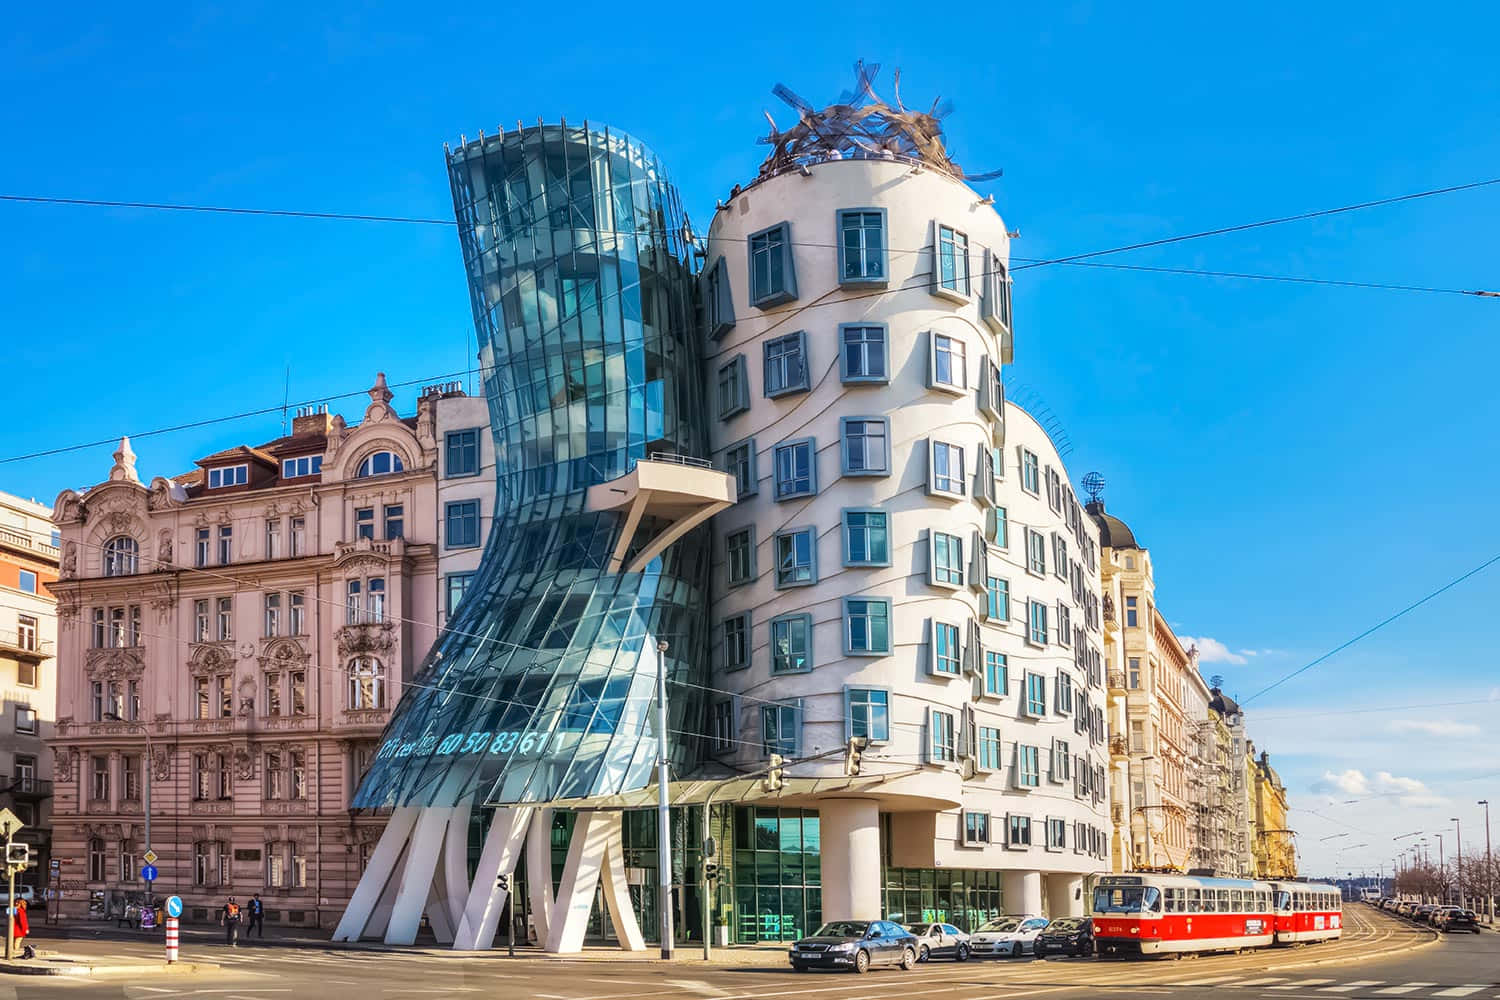 Dancing House With Red Tram Wallpaper